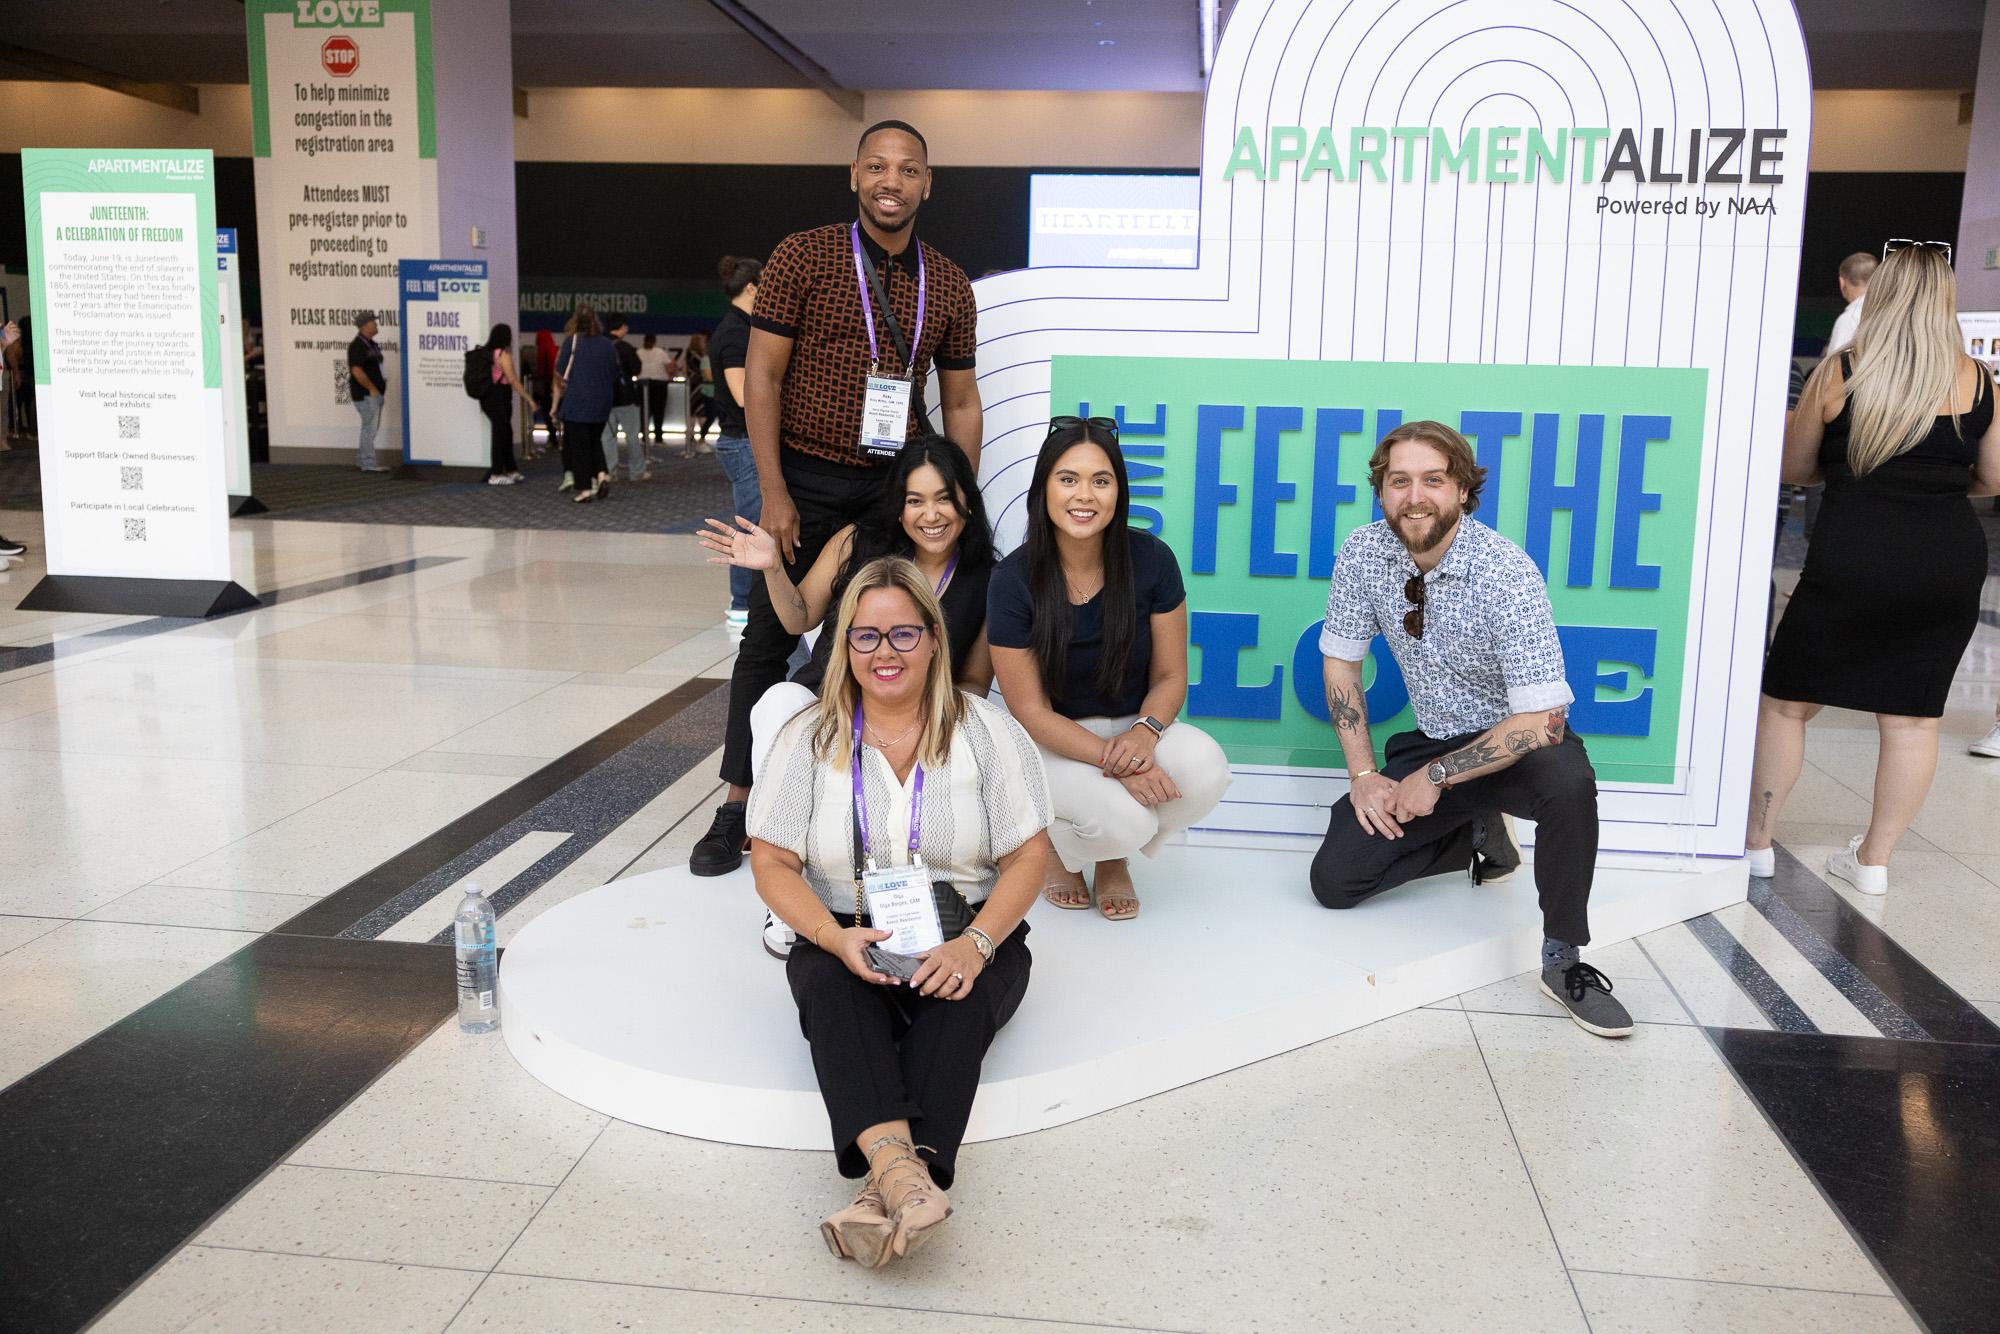 NAA’s Affinity Pavilion at Apartmentalize brings together a diverse assortment of communities centered around the rental housing industry.